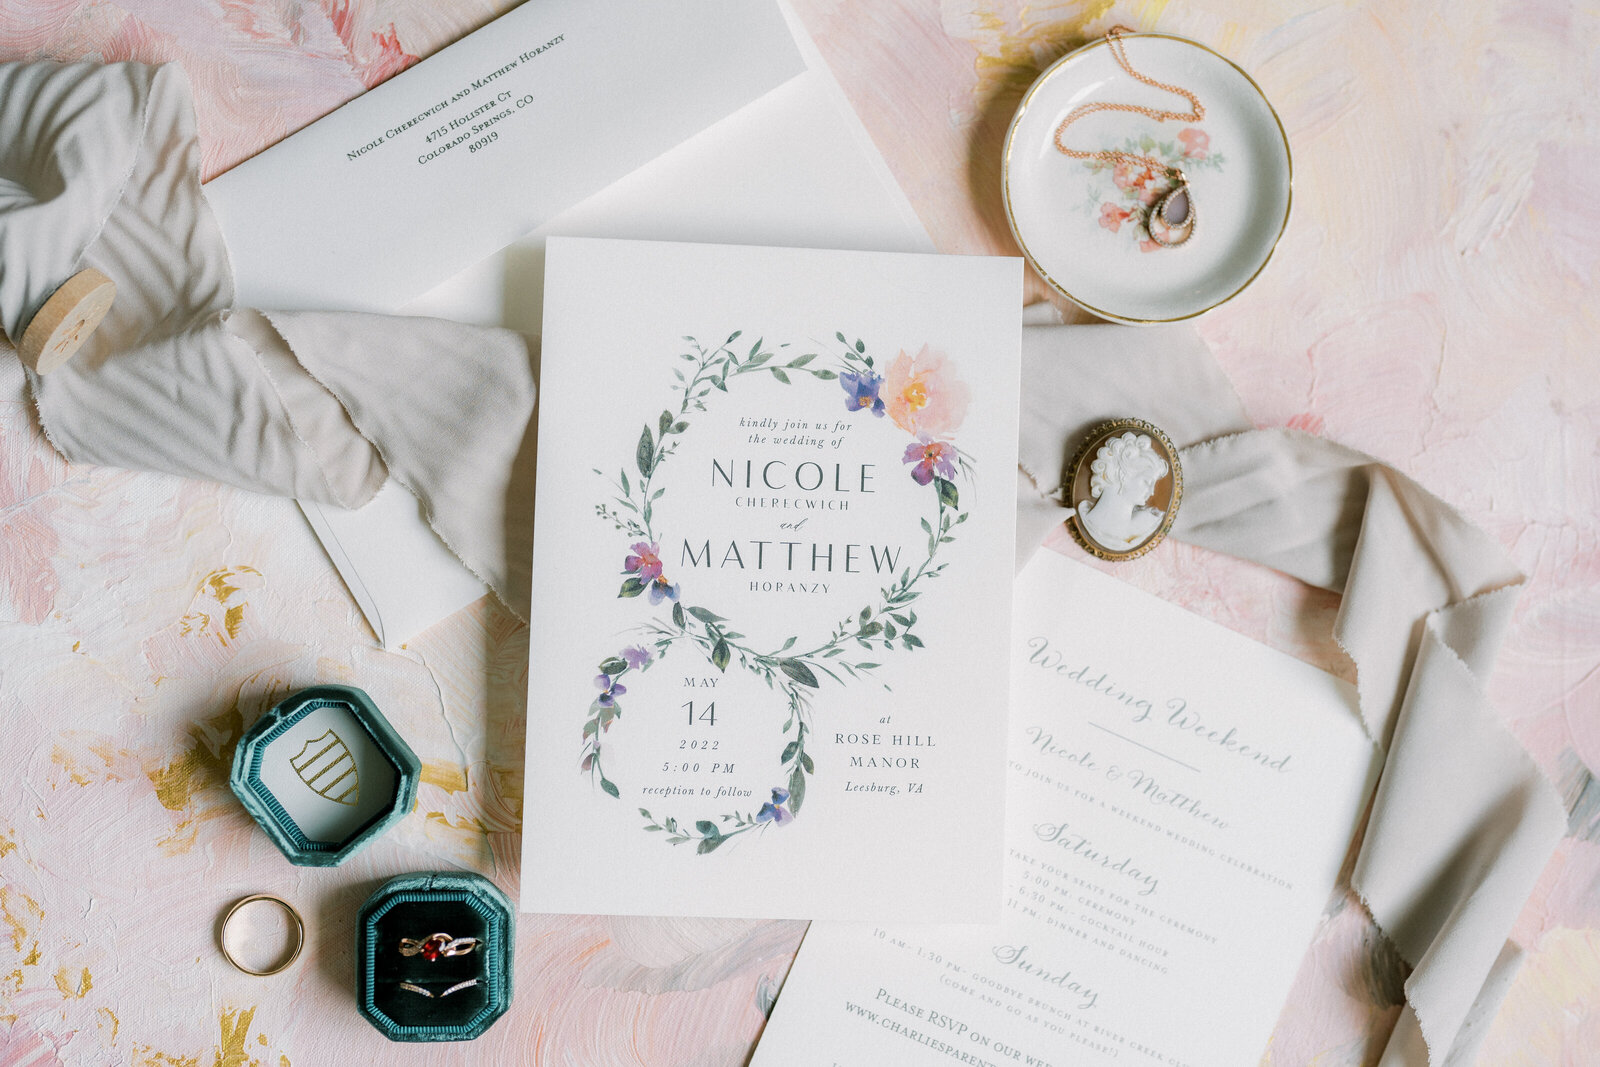 Wedding invitation and details on a pink backdrop